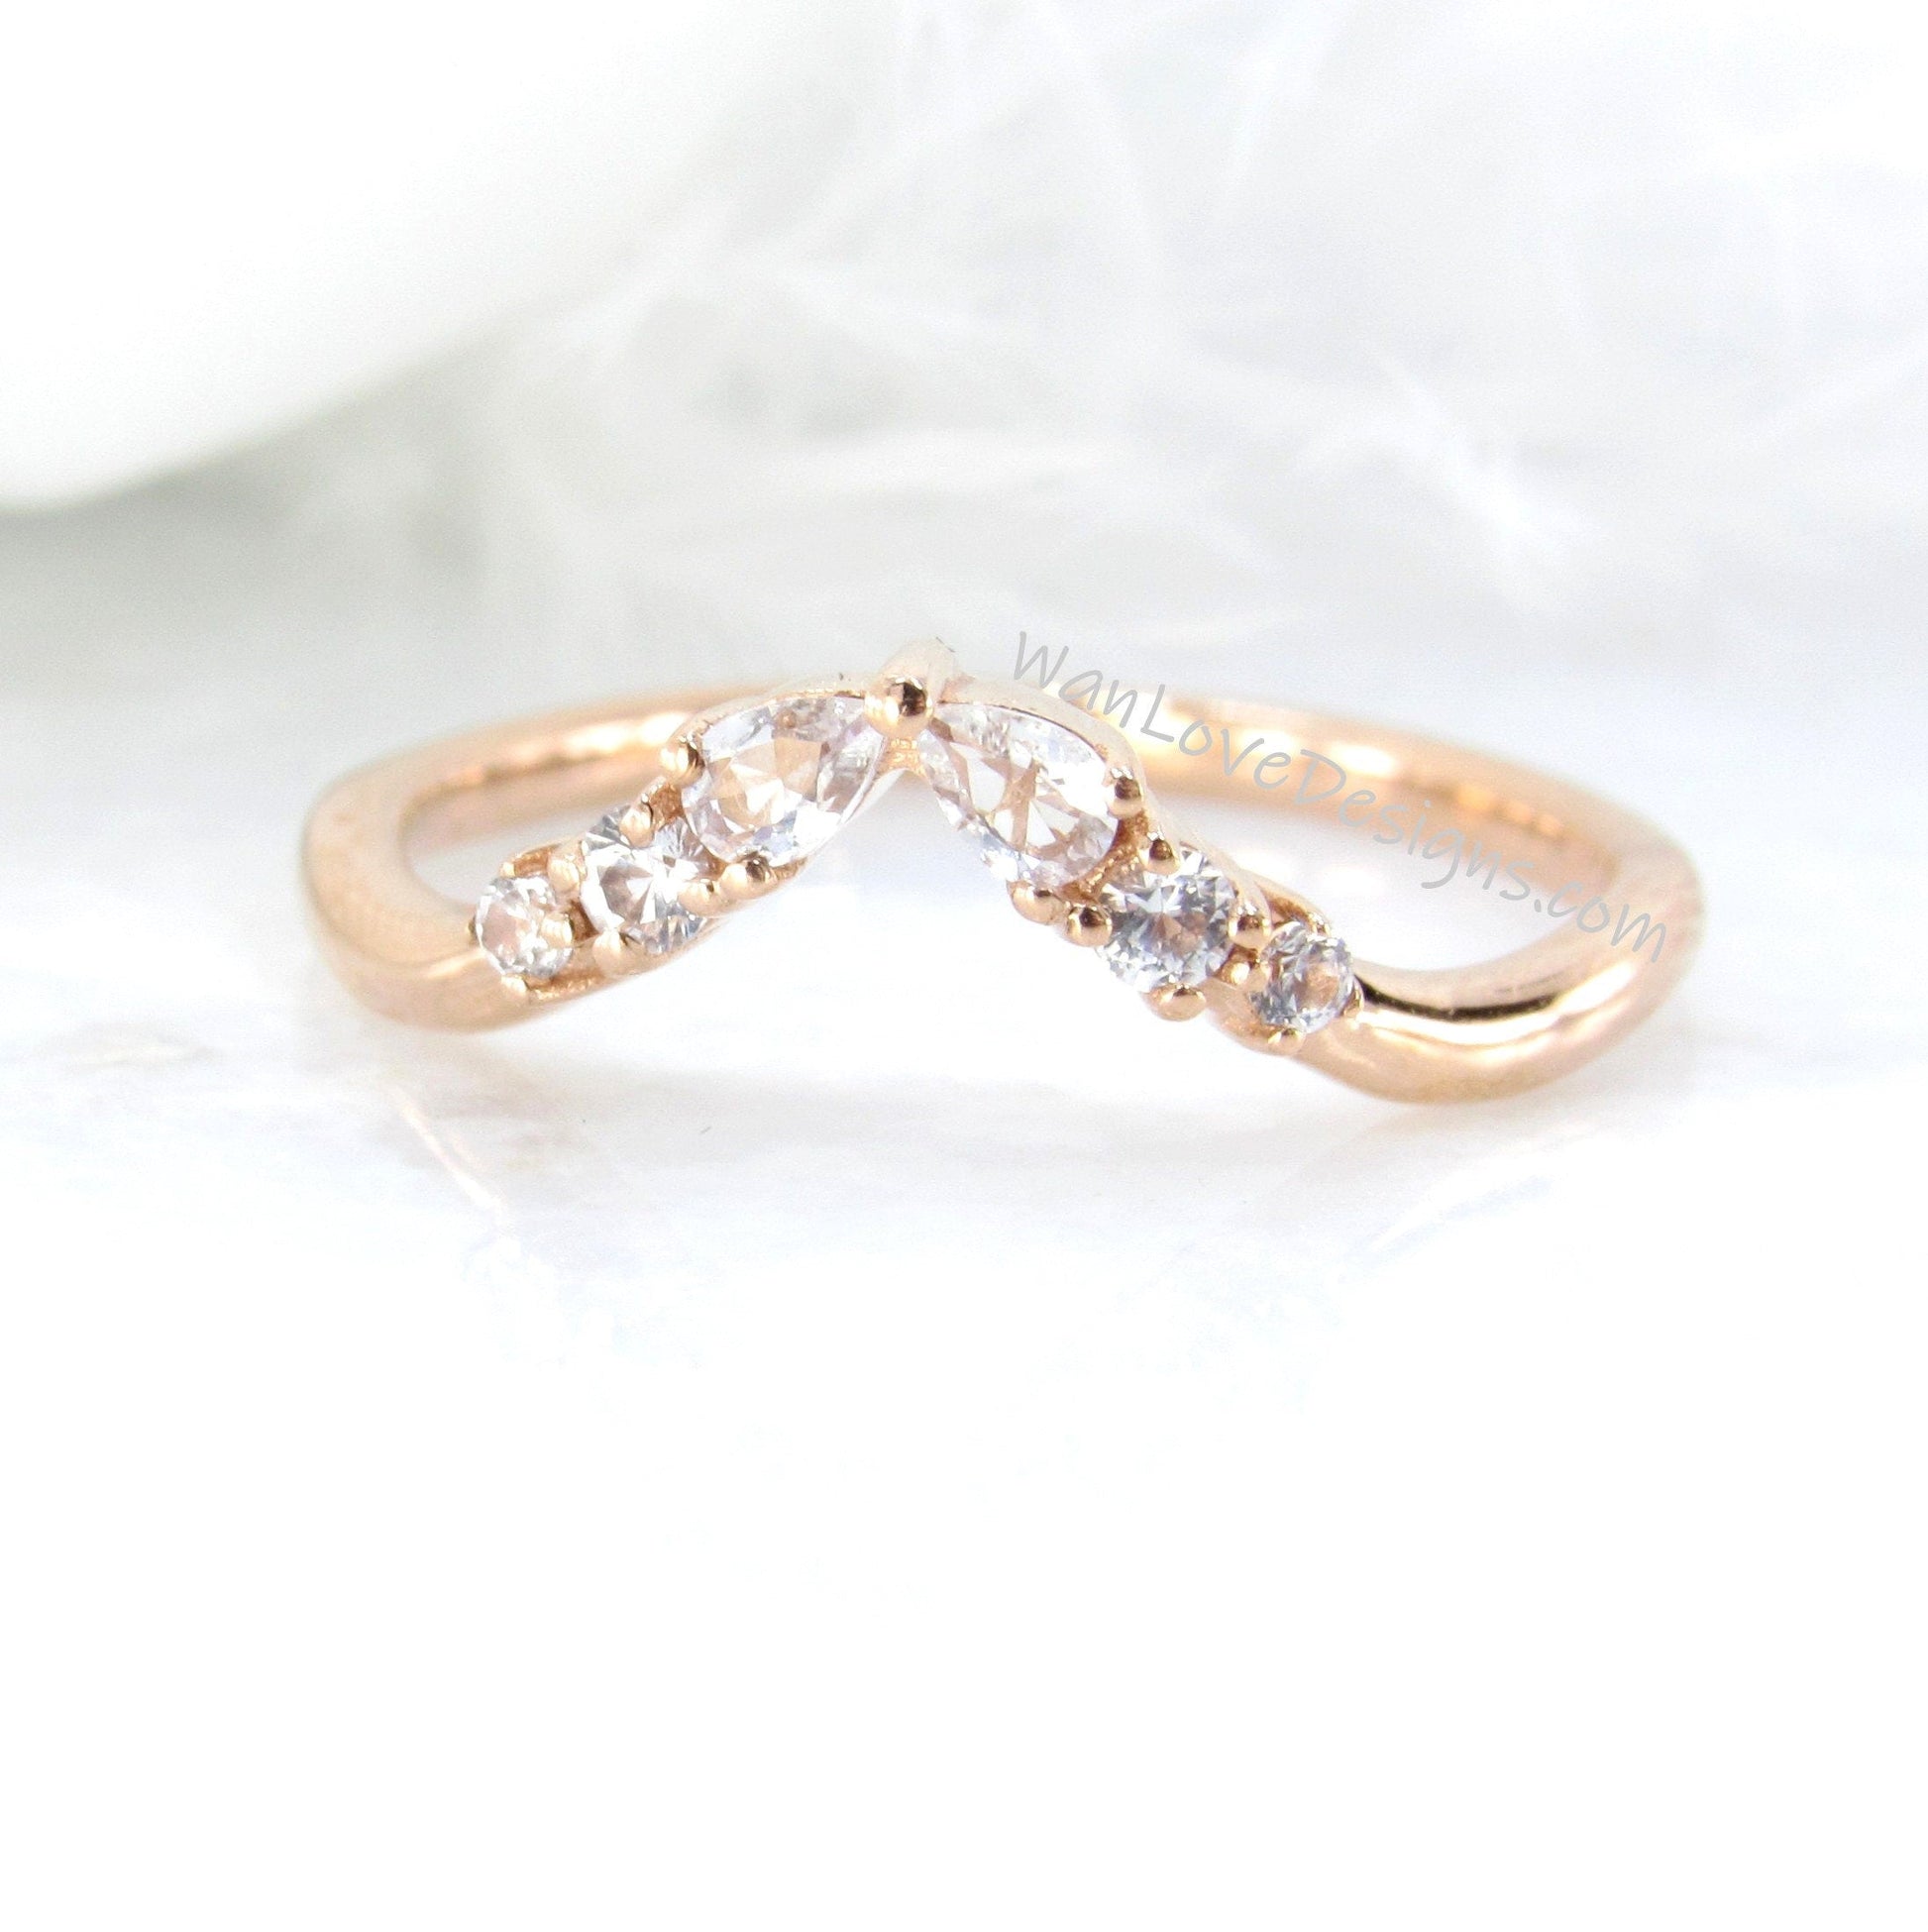 Art Deco Matching Rings/ White Sapphire Wedding Band/ Solid Rose Gold Dainty Bridal Ring/ Curved Design Women Ring/ Birthday Gift/ Ready Wan Love Designs